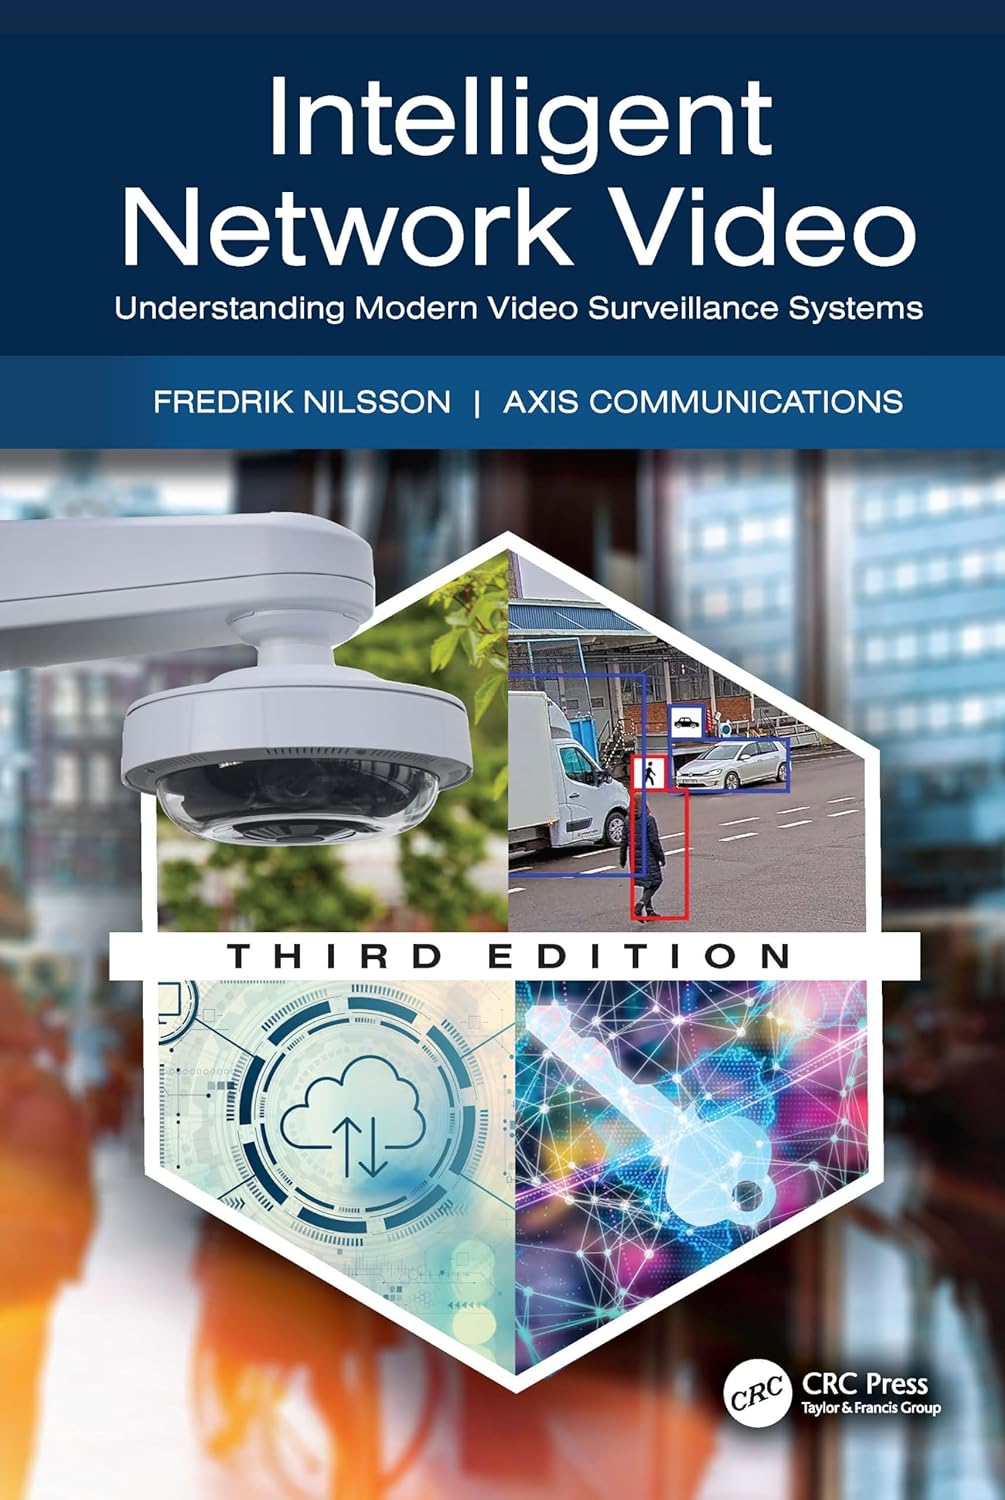 Axis VP Fredrik Nilsson Releases Latest Edition of Intelligent Network Video Guide